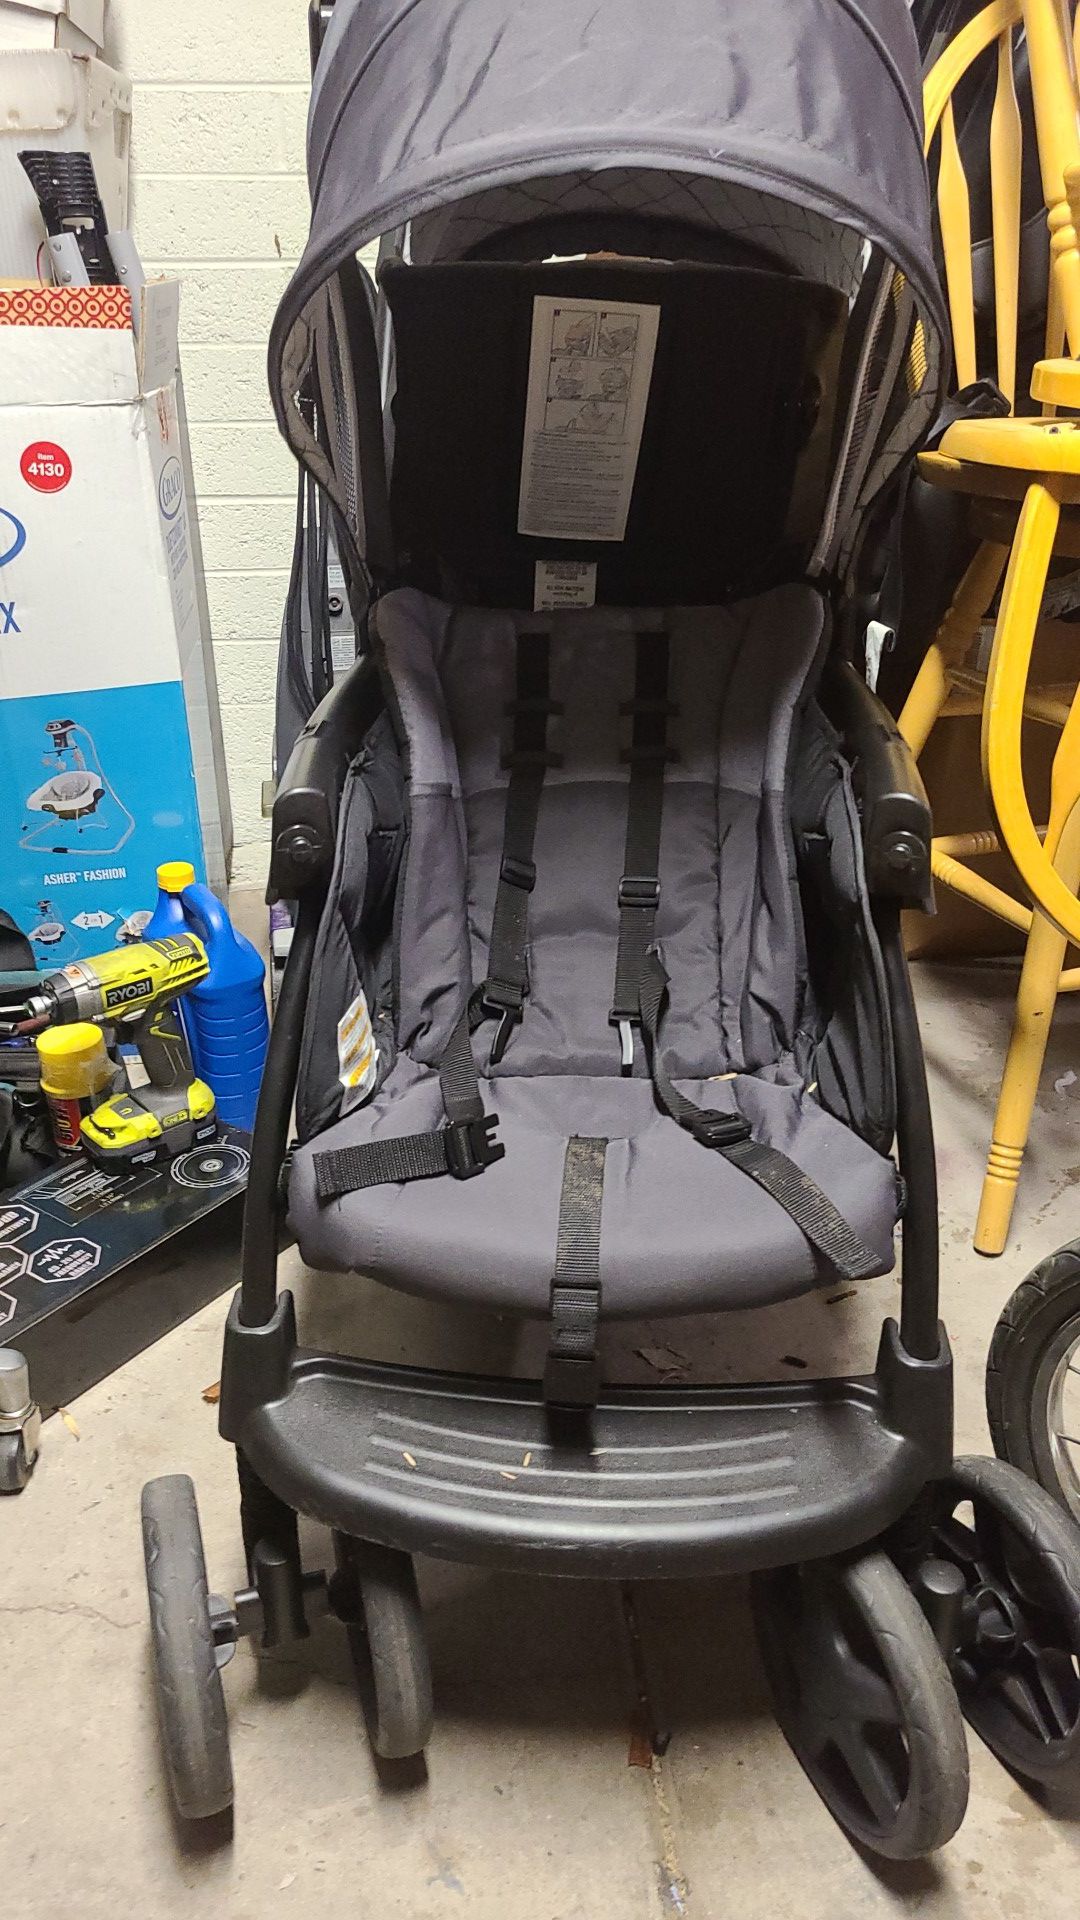 Greco Double Stroller- $100